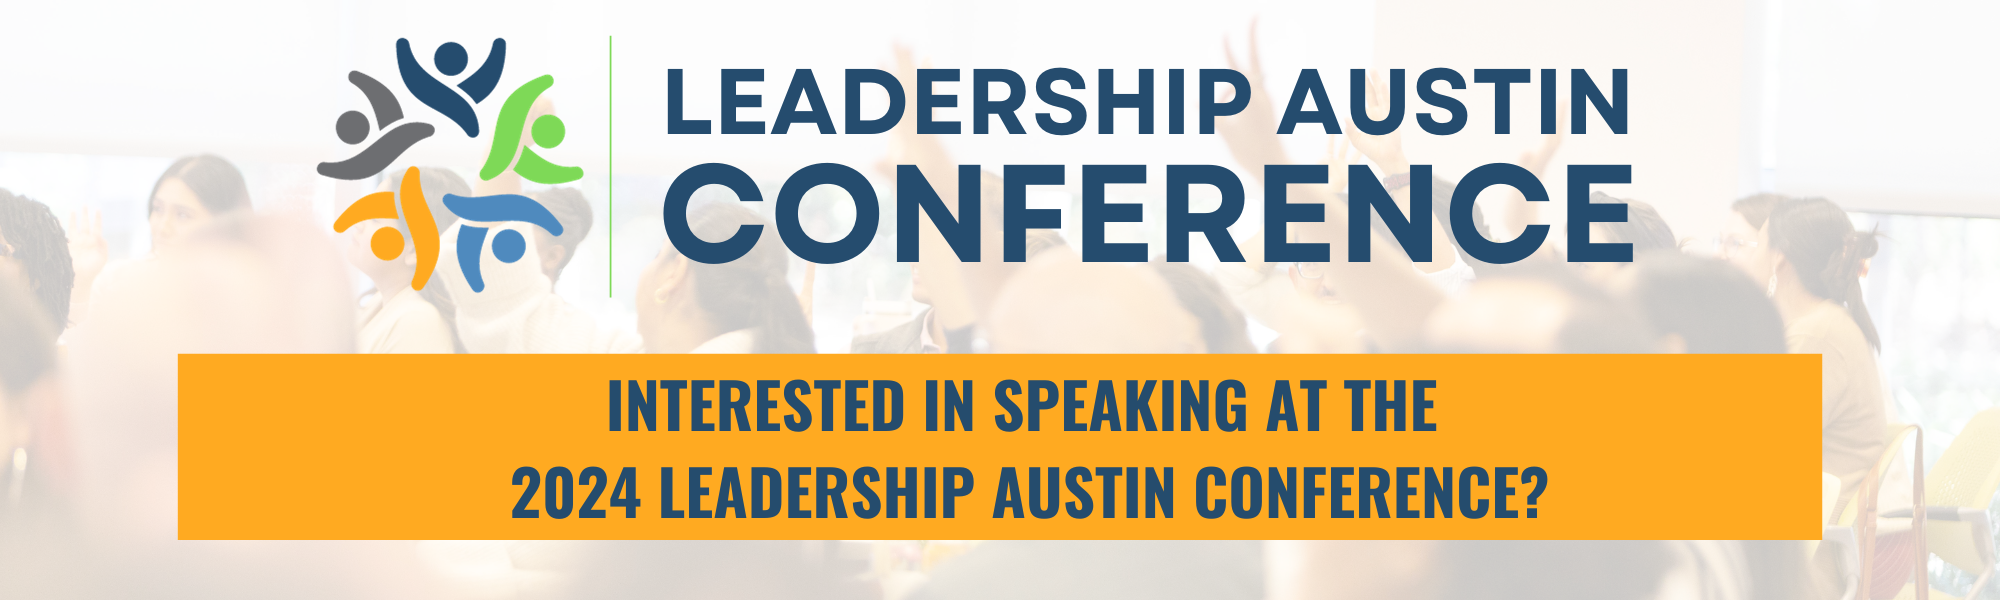 OPEN CALL: SPEAKERS FOR THE 2024 LEADERSHIP AUSTIN CONFERENCE